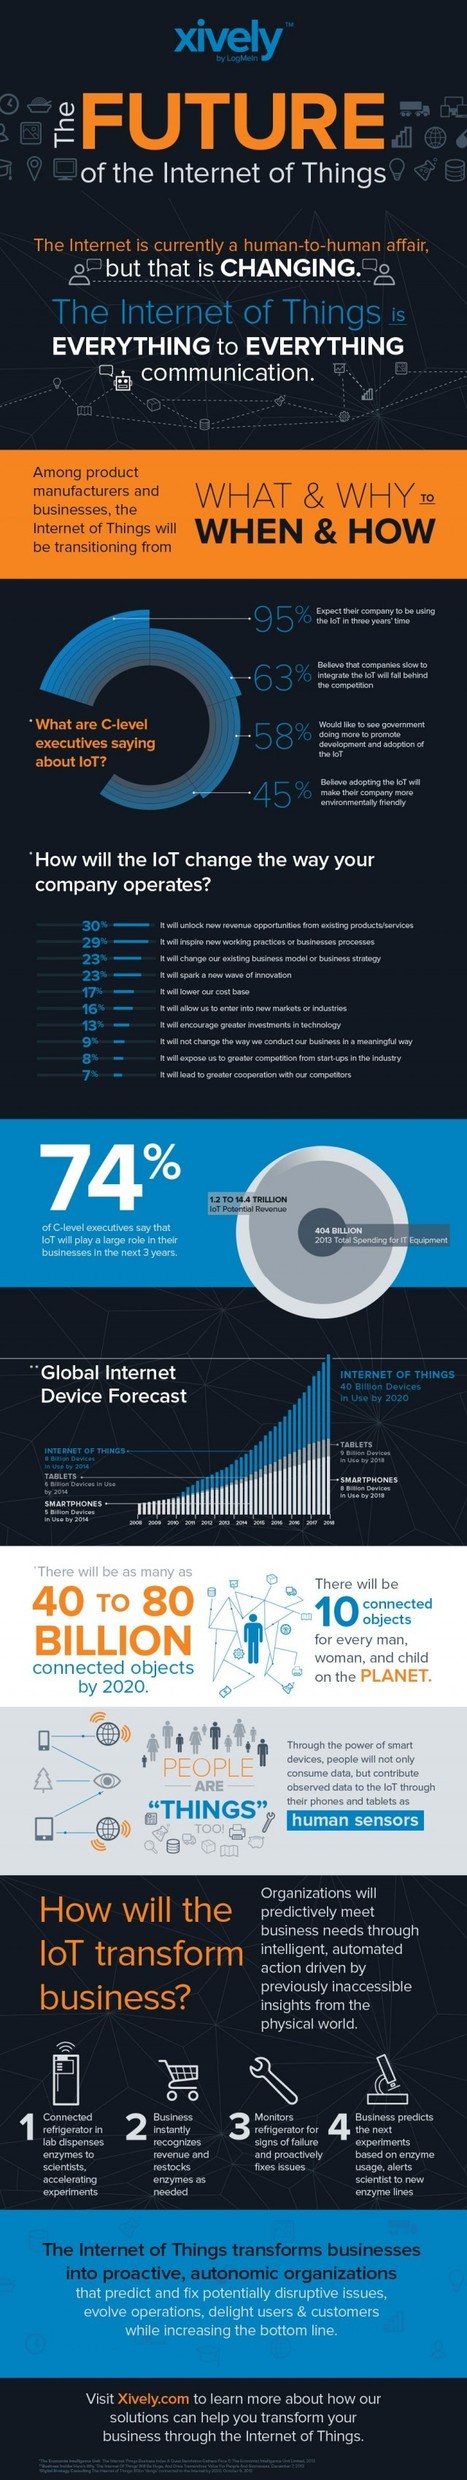 The Future of the Internet of Things [infographic] | E-Learning-Inclusivo (Mashup) | Scoop.it